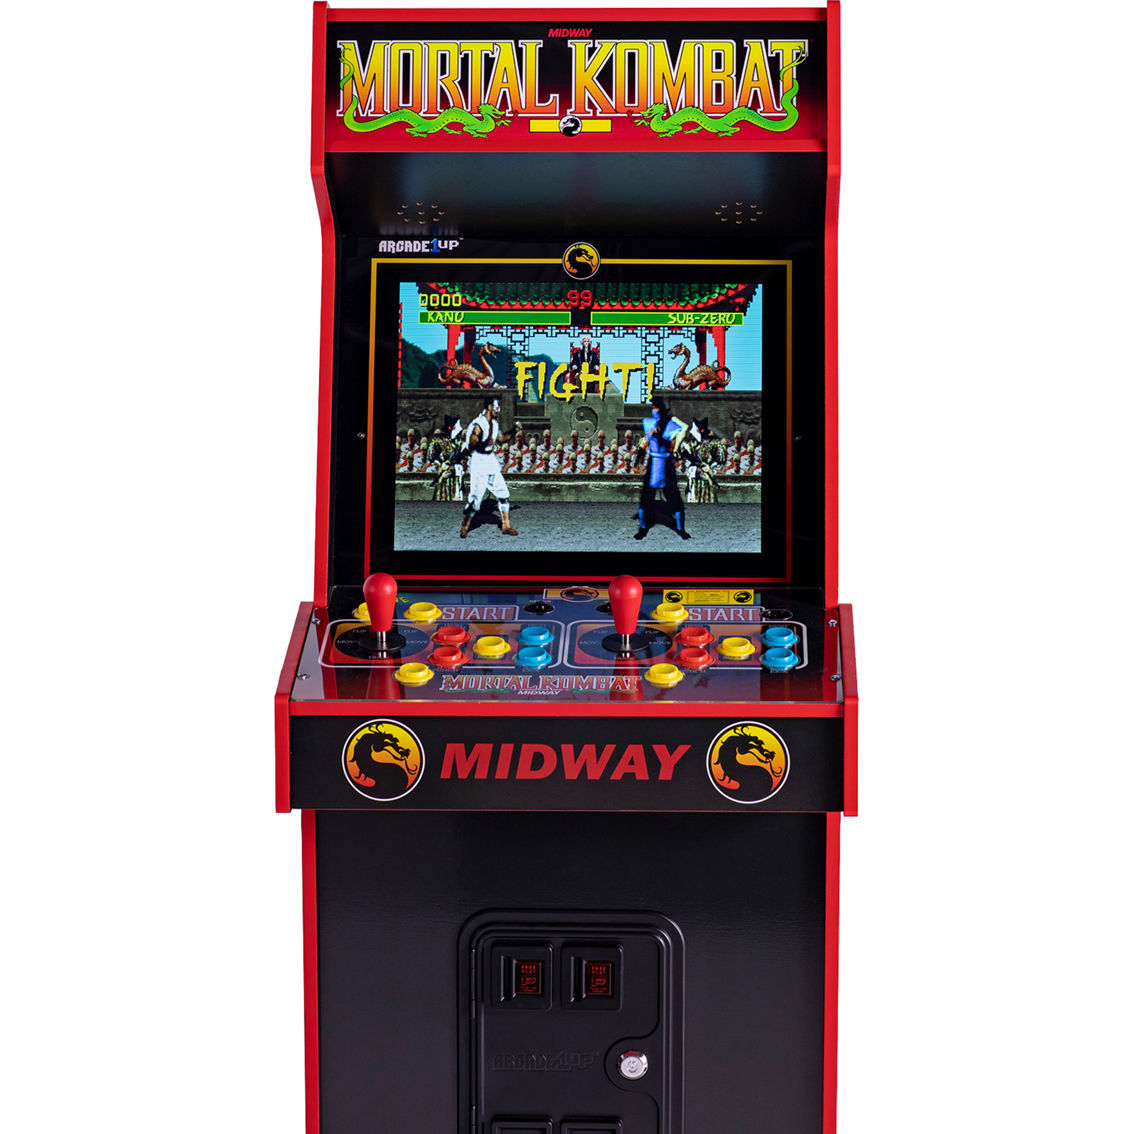 Arcade 1UP MK 30th Anniversary Edition Legacy - Image 2 of 8